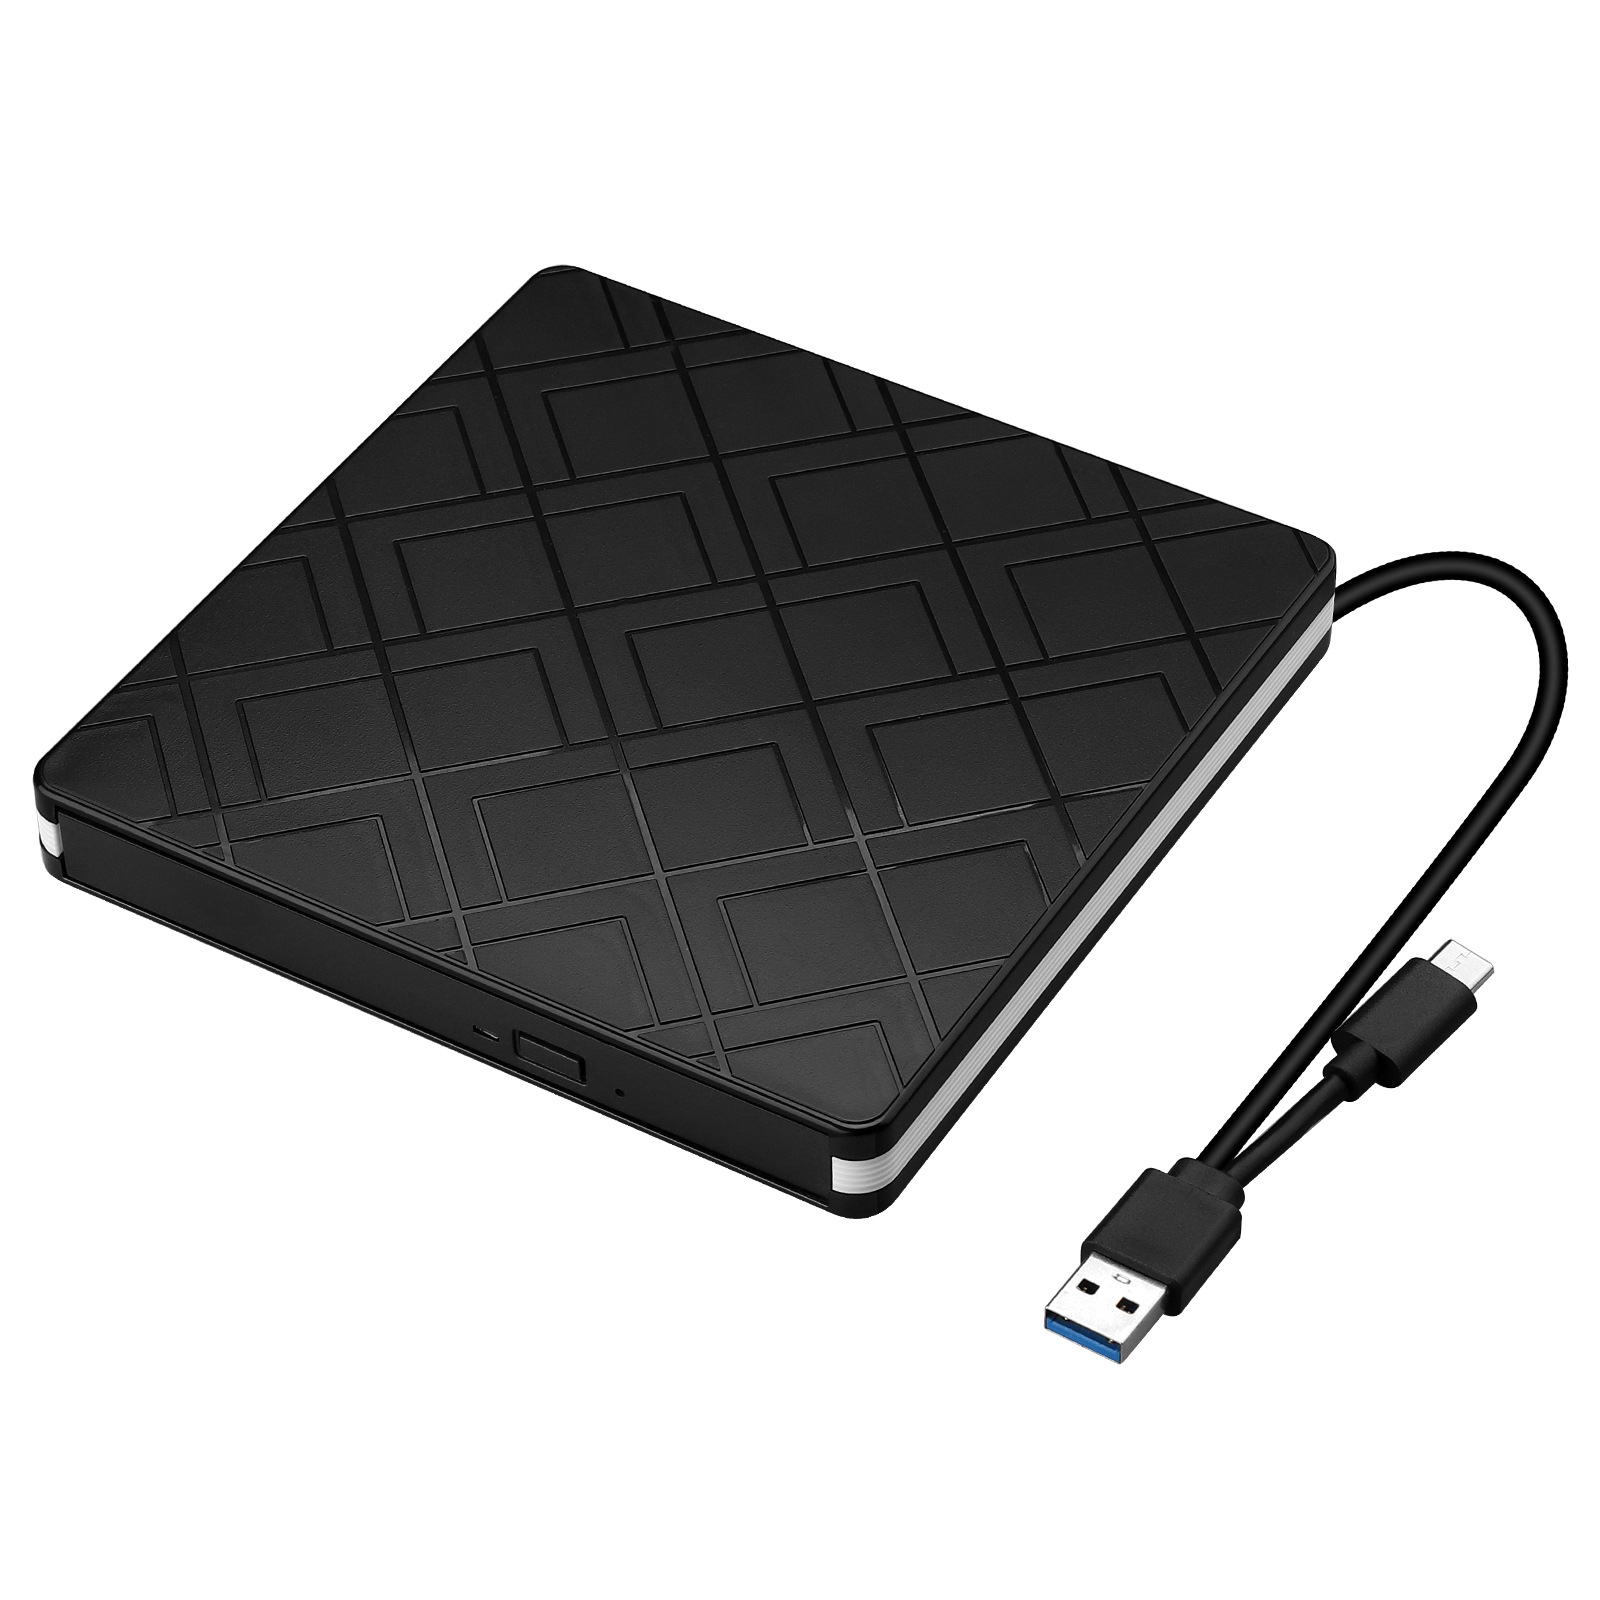 Cmaos-USB30-Type-C-External-Optical-Drive-CDDVD-Player-Burner-for-PCNotebook-in-HomeOutdoorWork-1748748-5